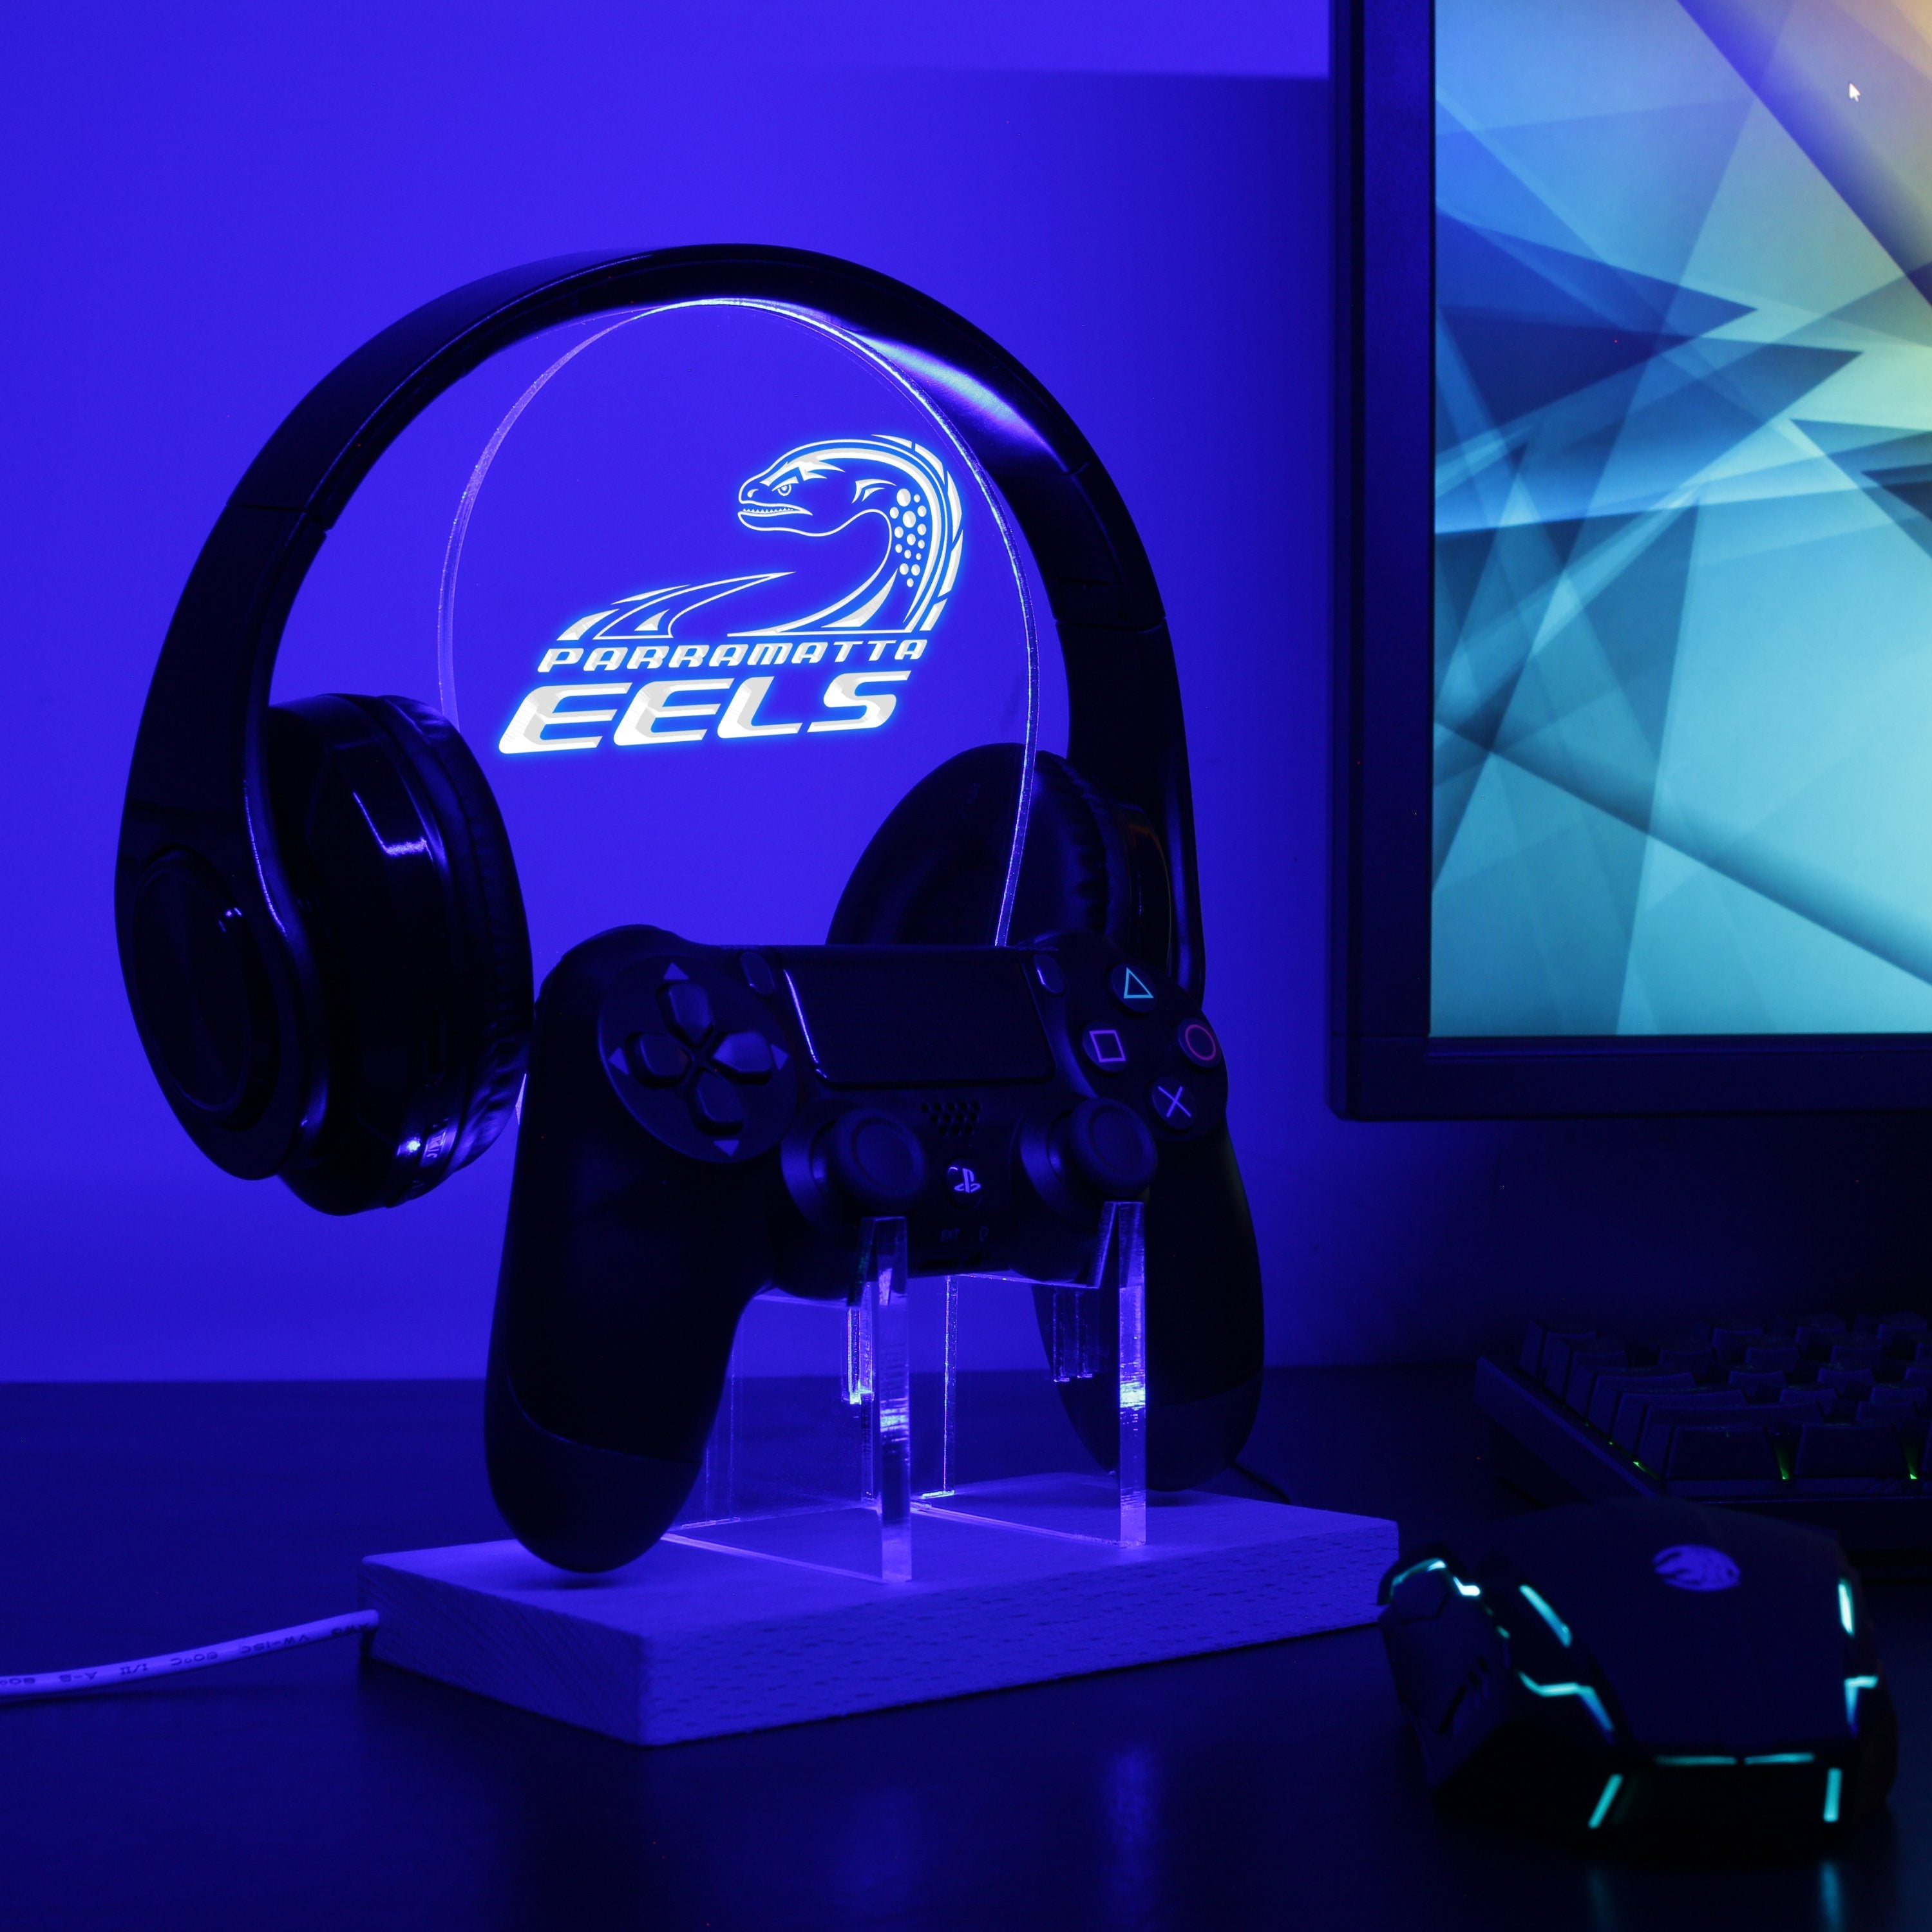 Parramatta Eels LED Gaming Headset Controller Stand